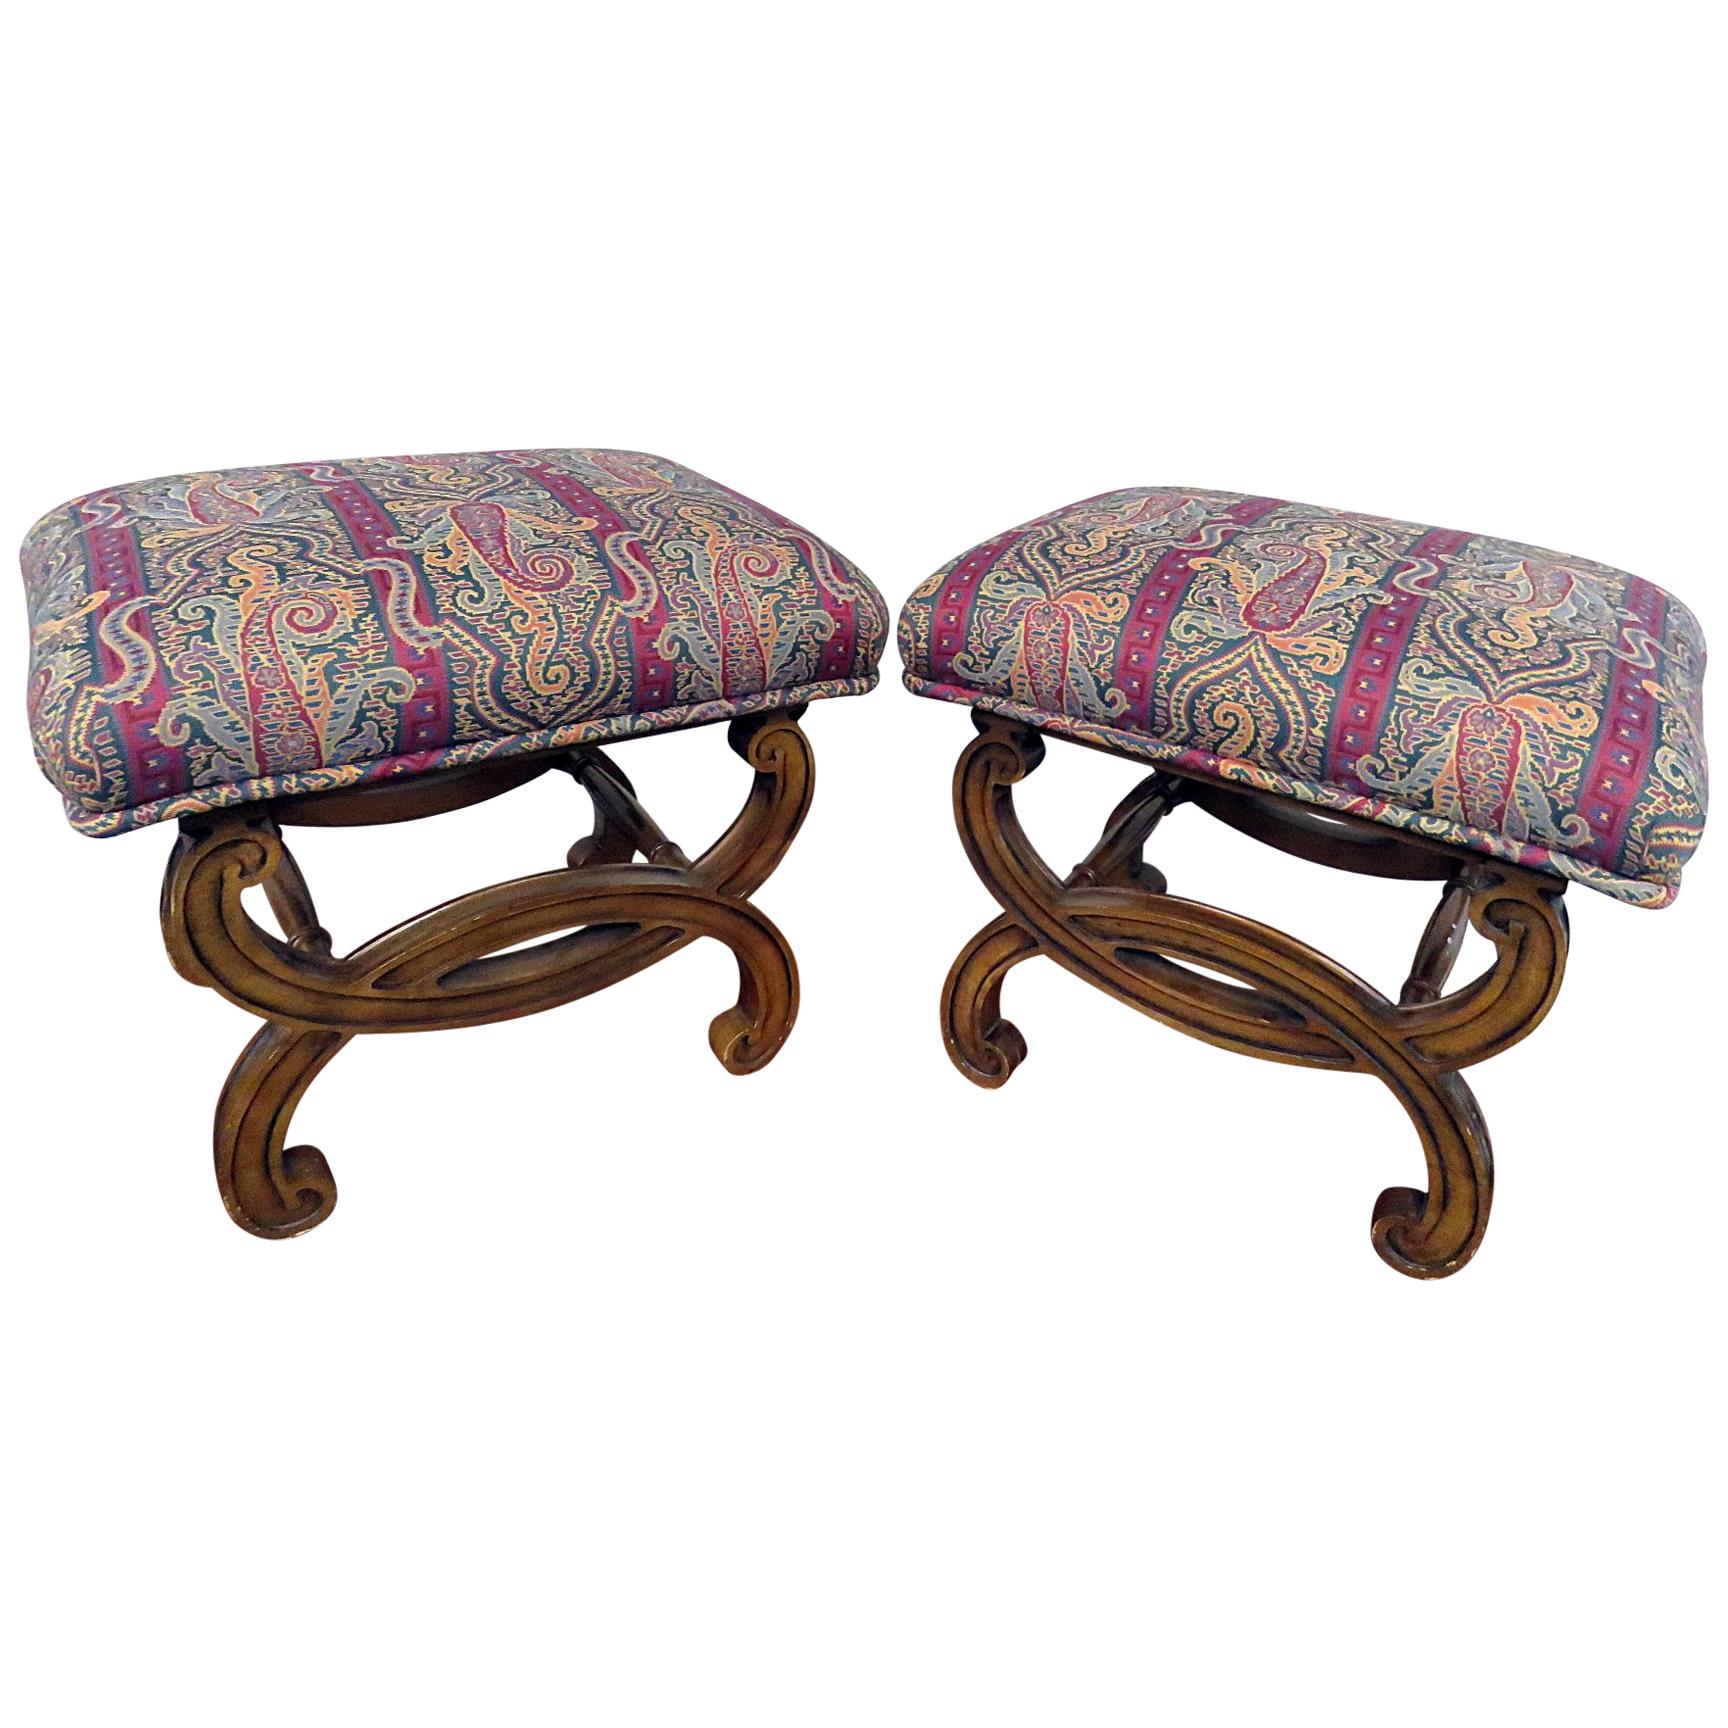 Pair of Dorothy Draper style French Regency Style Footstools Benches For Sale